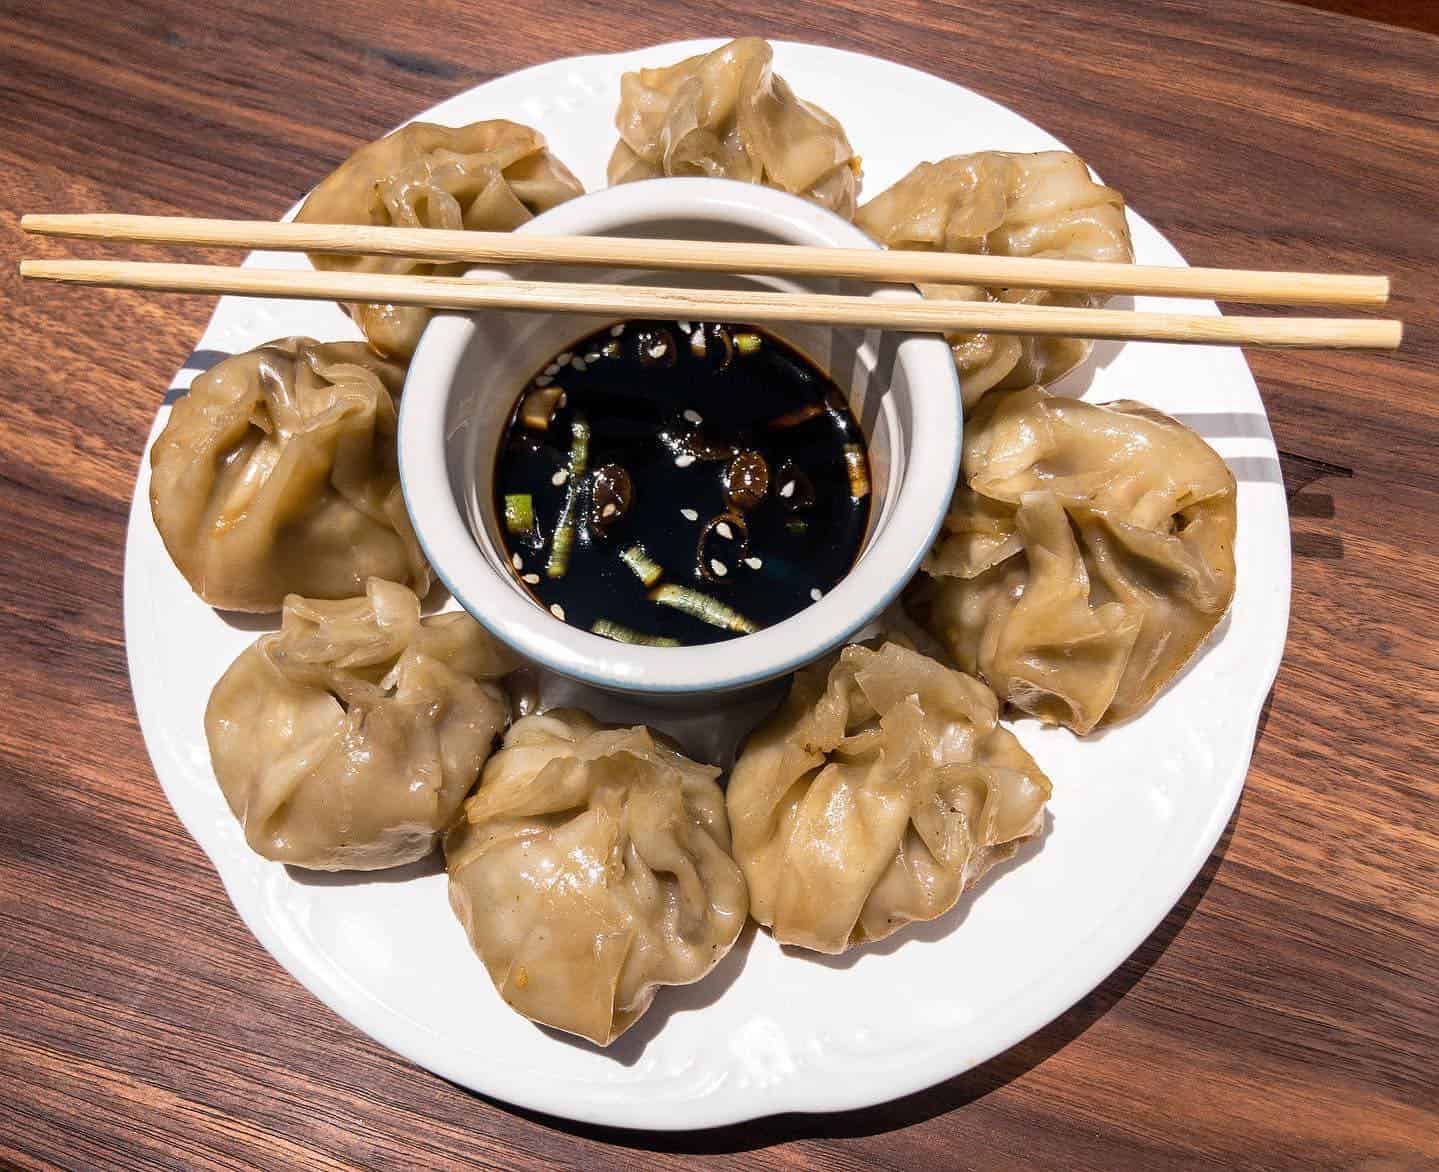 Here’s a throwback recipe to my Wild Pork dumplings!! If you haven’t given this a try and have some ground pork in the freezer you should definitely change that!! Link in bio and story 👀👀👀
•
•
•
•
#asianfood #dumplings #porkdumplings #asianfoodporn #dumplin #dumpling #dumplinglove #dumplingsfordays #wildhogs #wildboar #wildboarhunting #wildpig #wildhog #wildboars #wildboarfever 
#eatahogsavetheworld 
#meateater 
#wildgamecooking #wildgame #eatwhatyoukill #fueledbynature #hunttoeat  #easyrecipes #foodiefeature #wifeofahuntercooks #publiclandowner #publiclandhunting